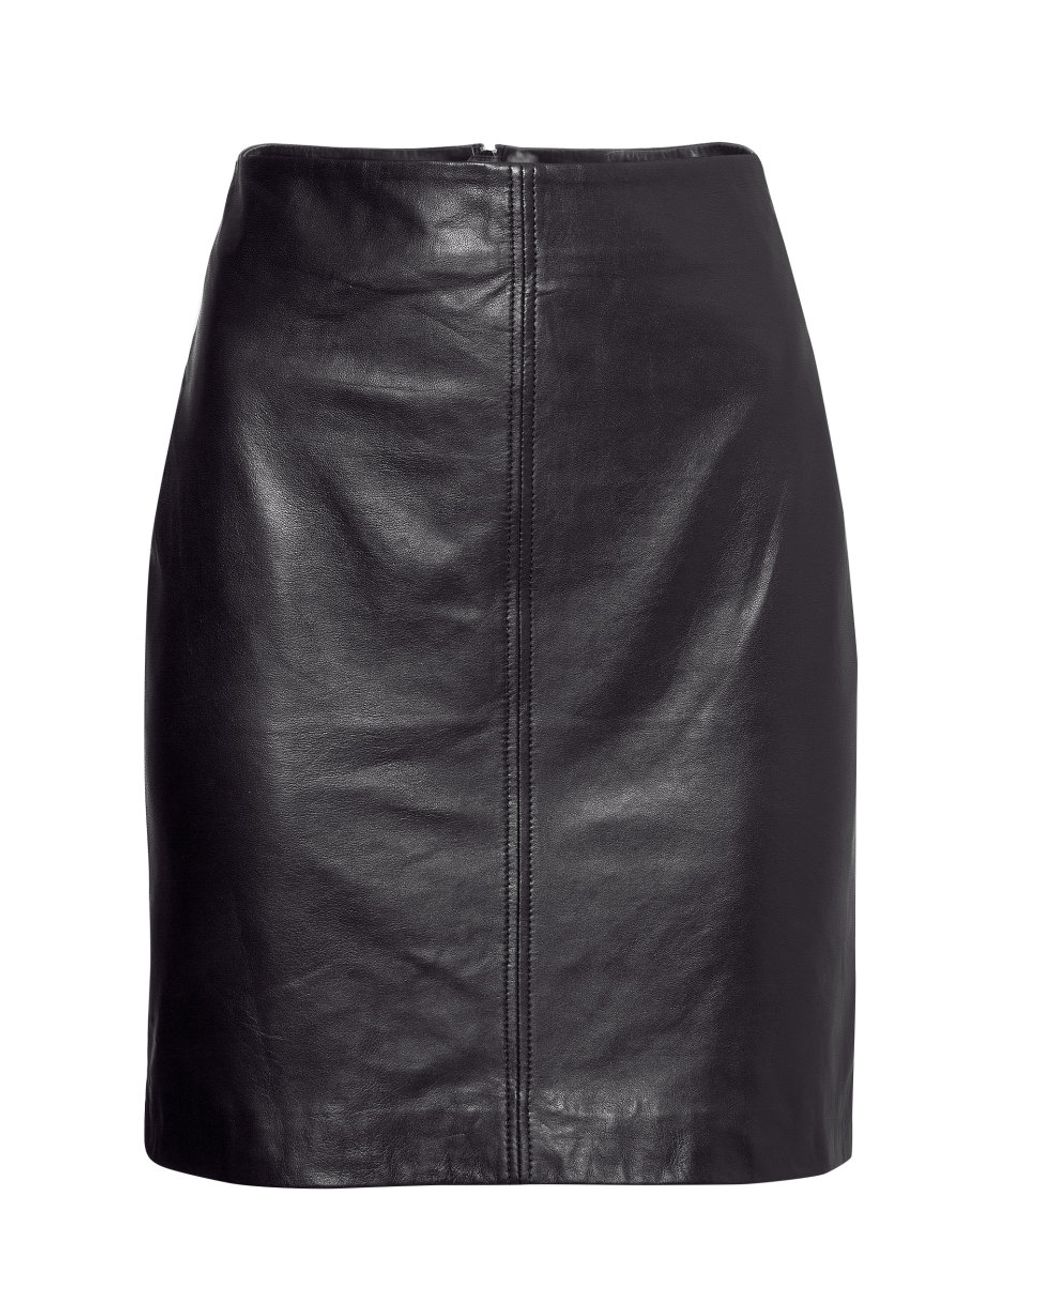 H&M Leather Skirt in Black | Lyst